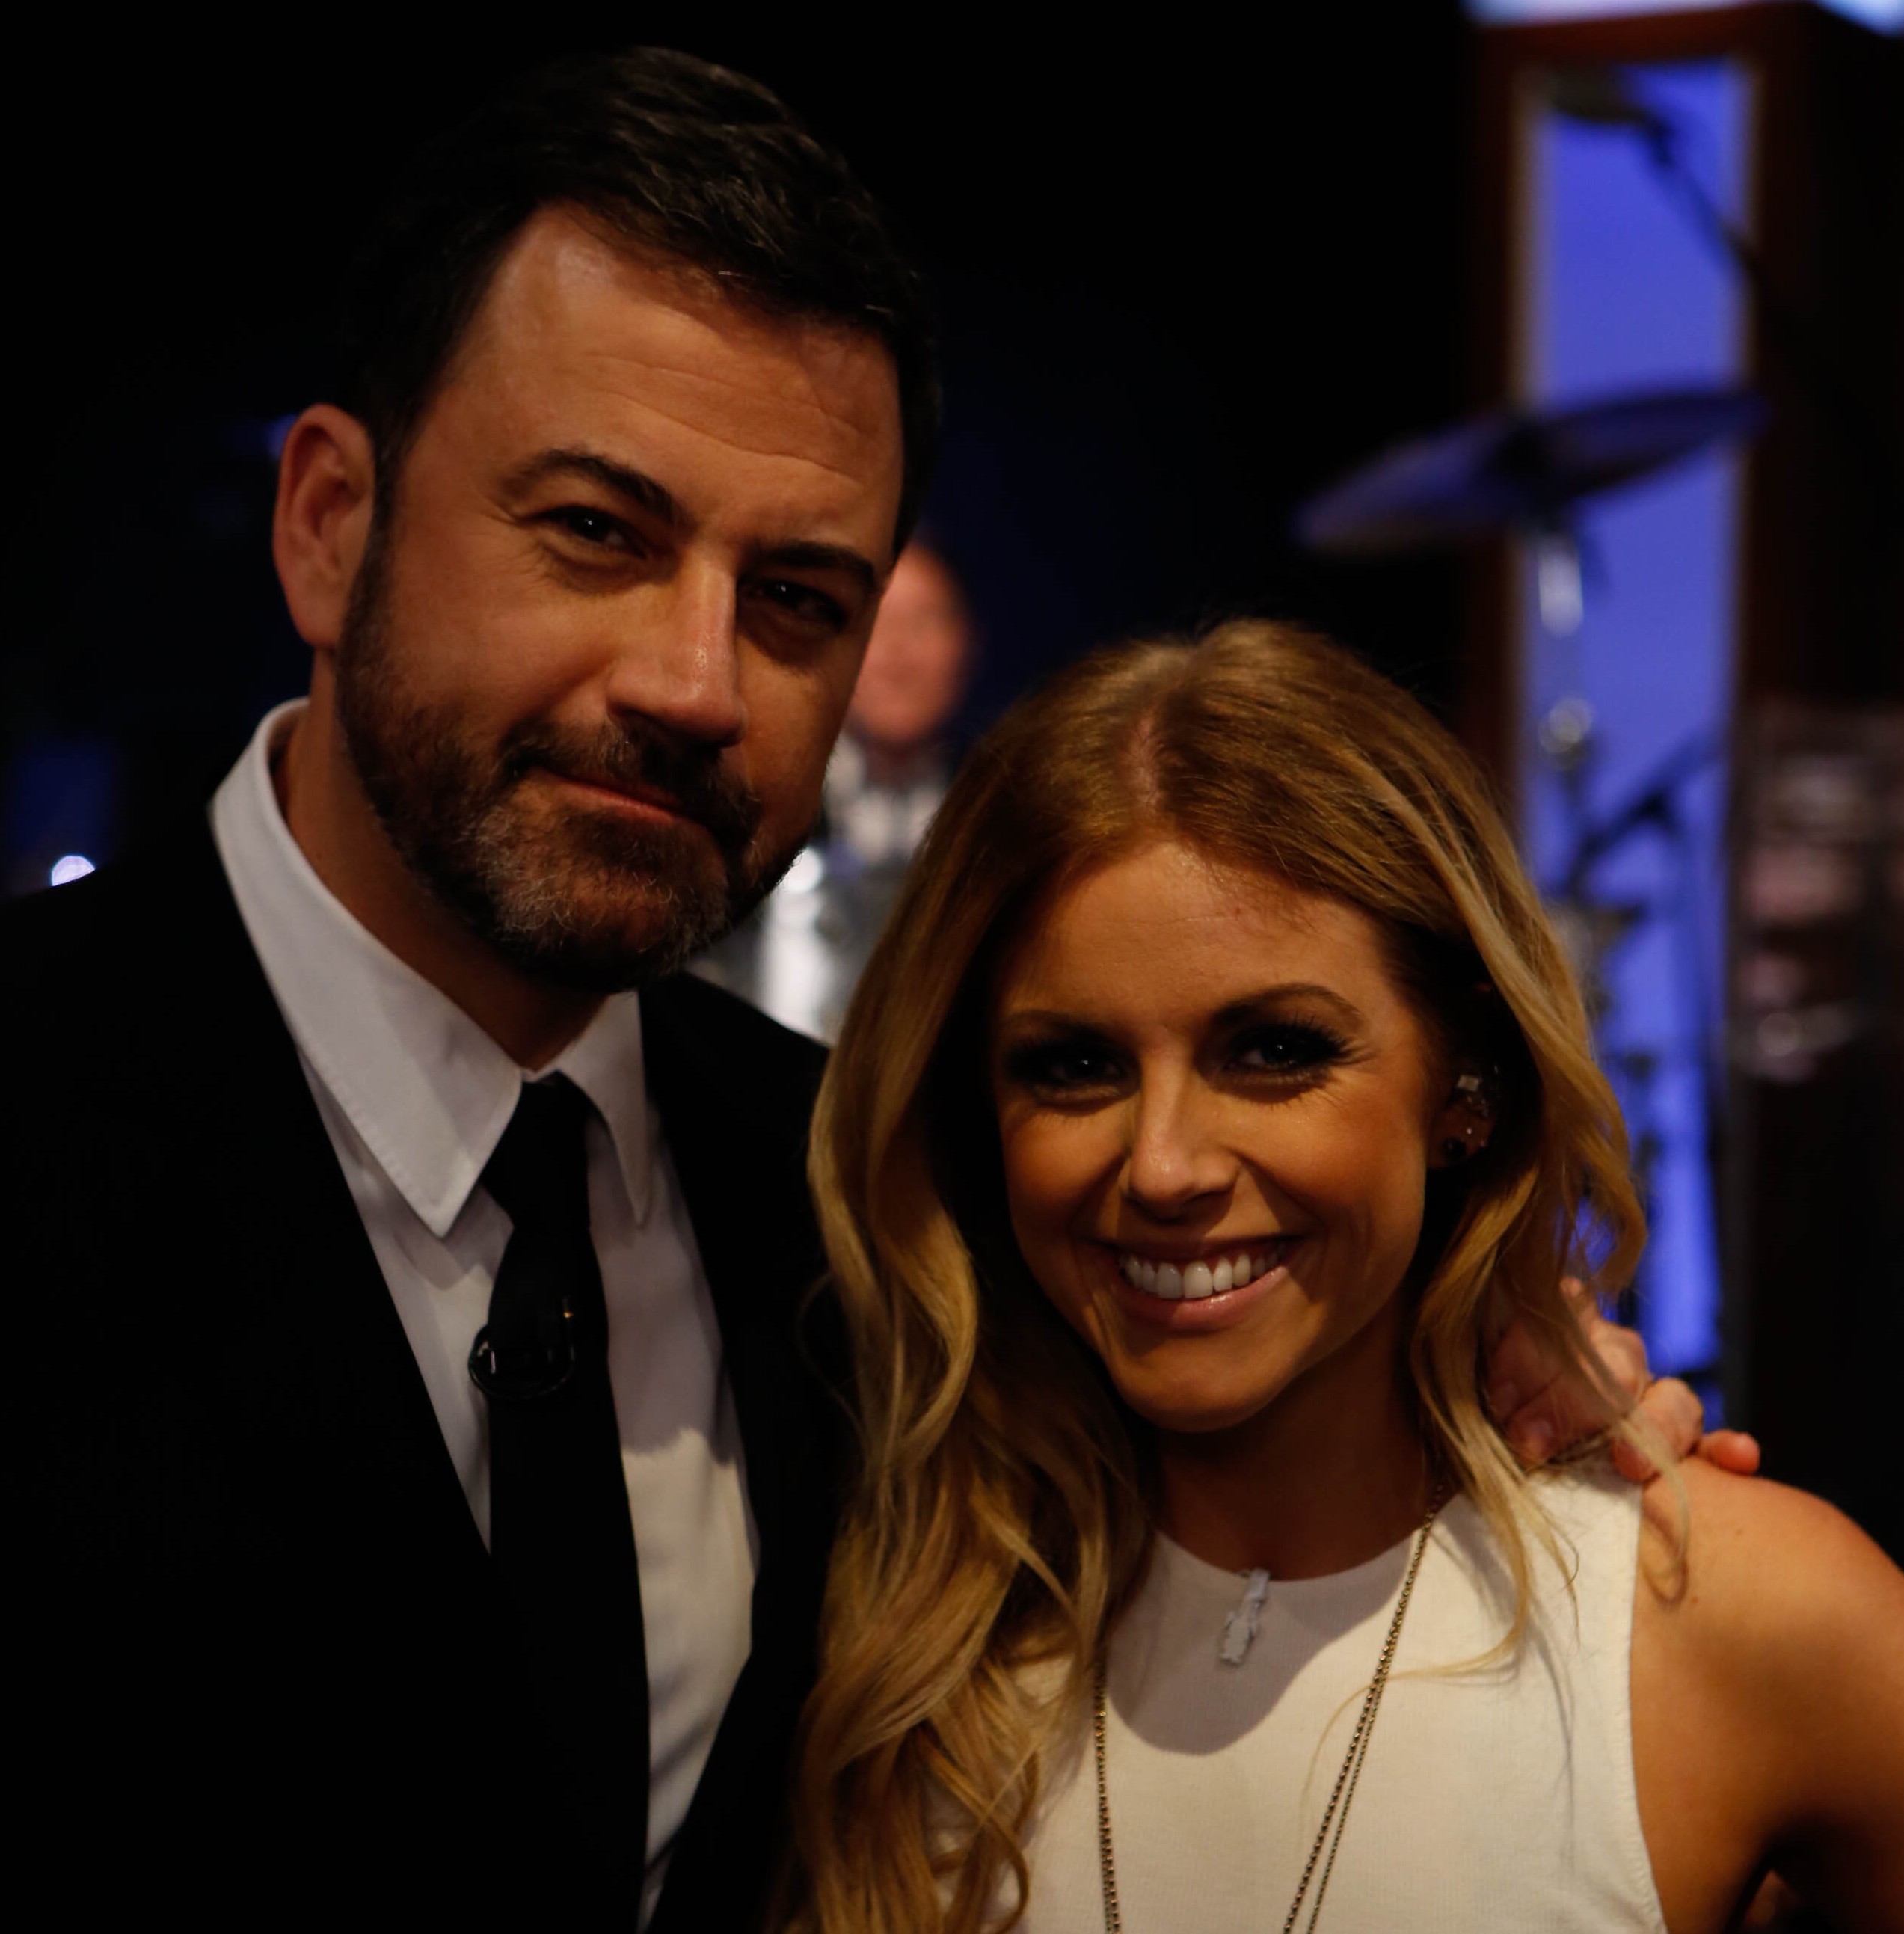 WATCH: Lindsay Ell Performs “Waiting On You” on Kimmel + Announces New Album